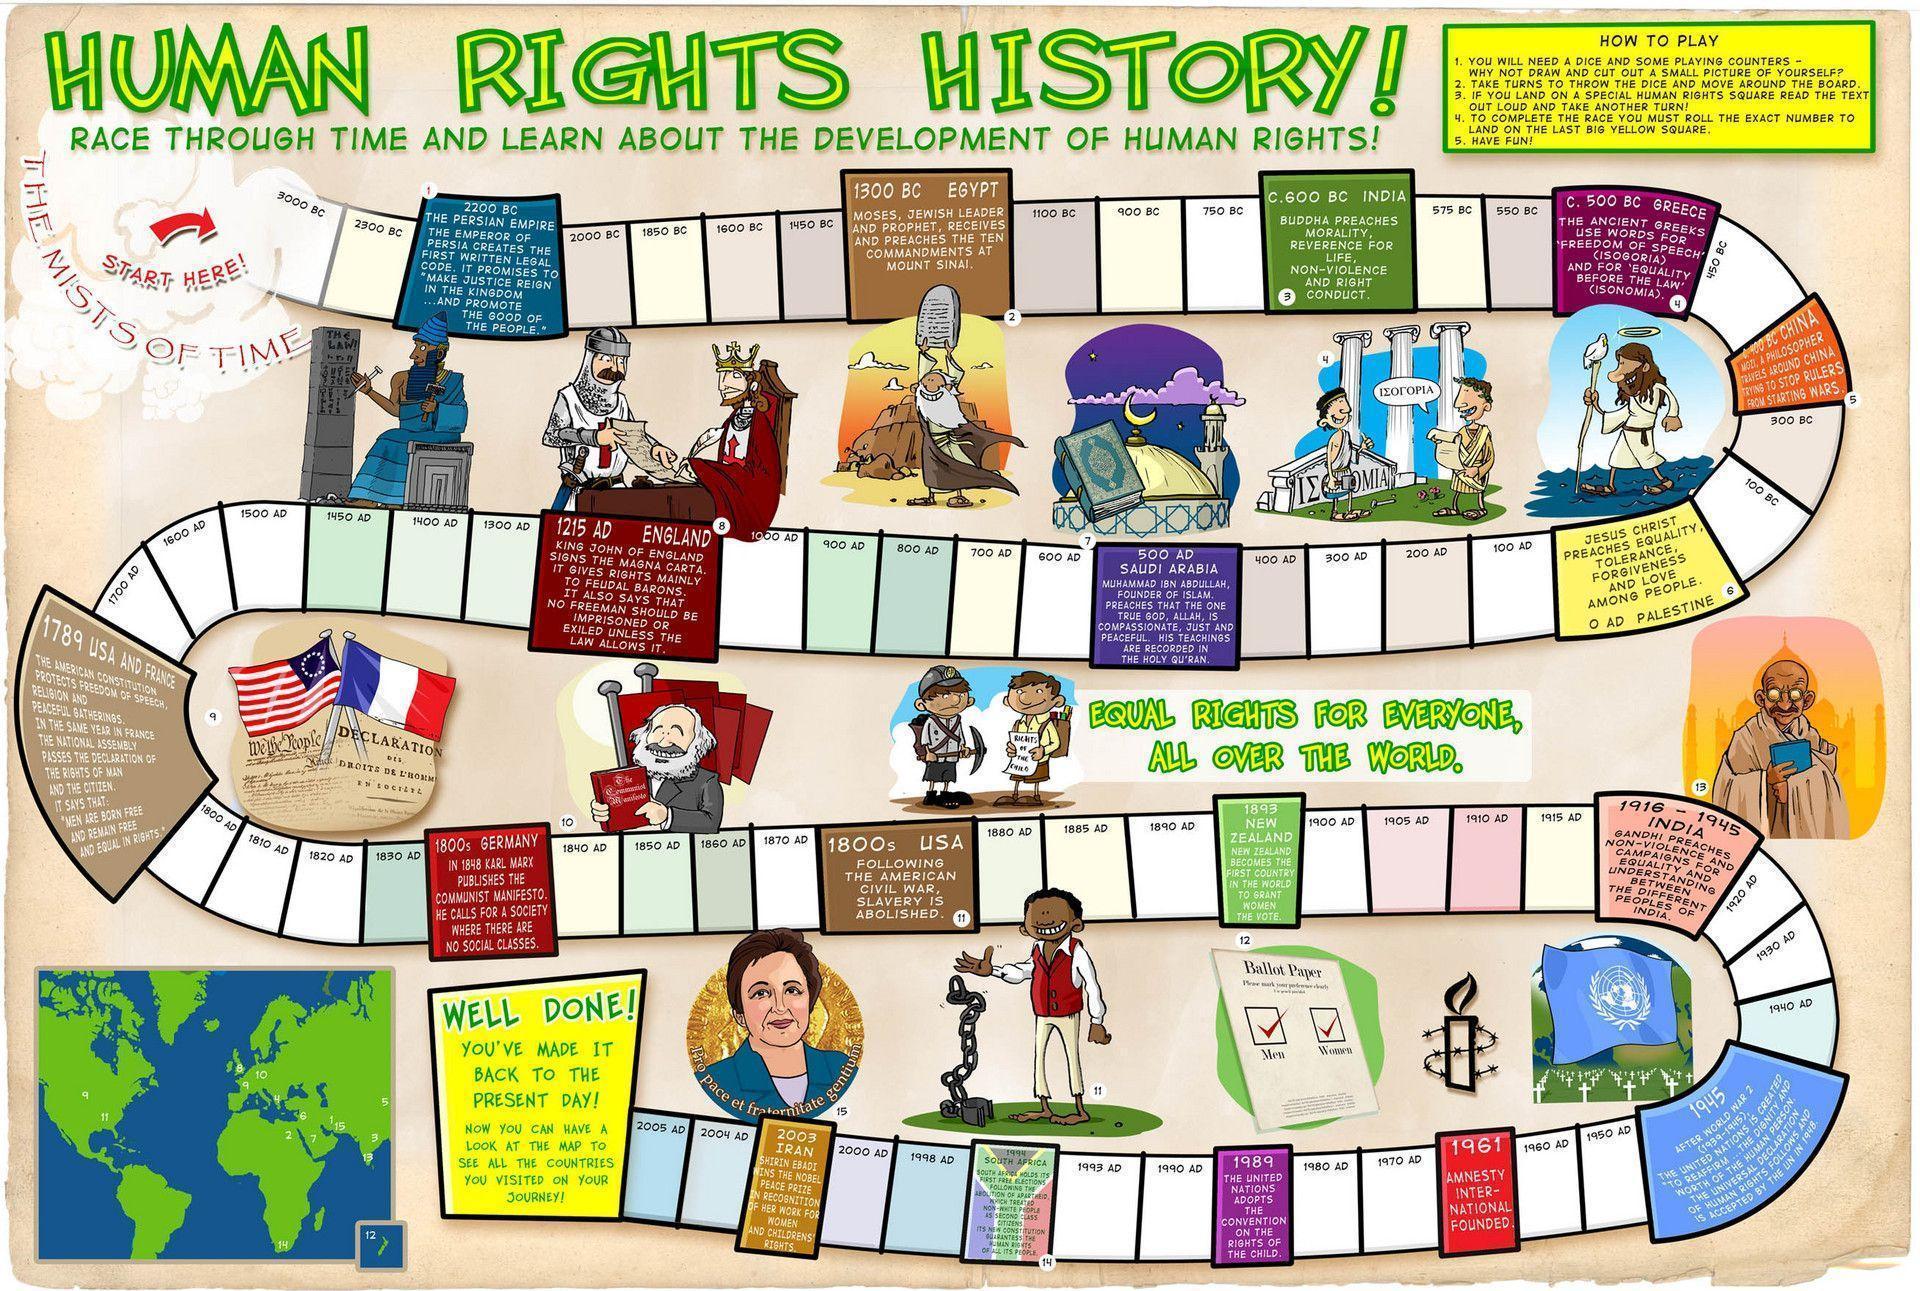 Wallpaper about UDHR